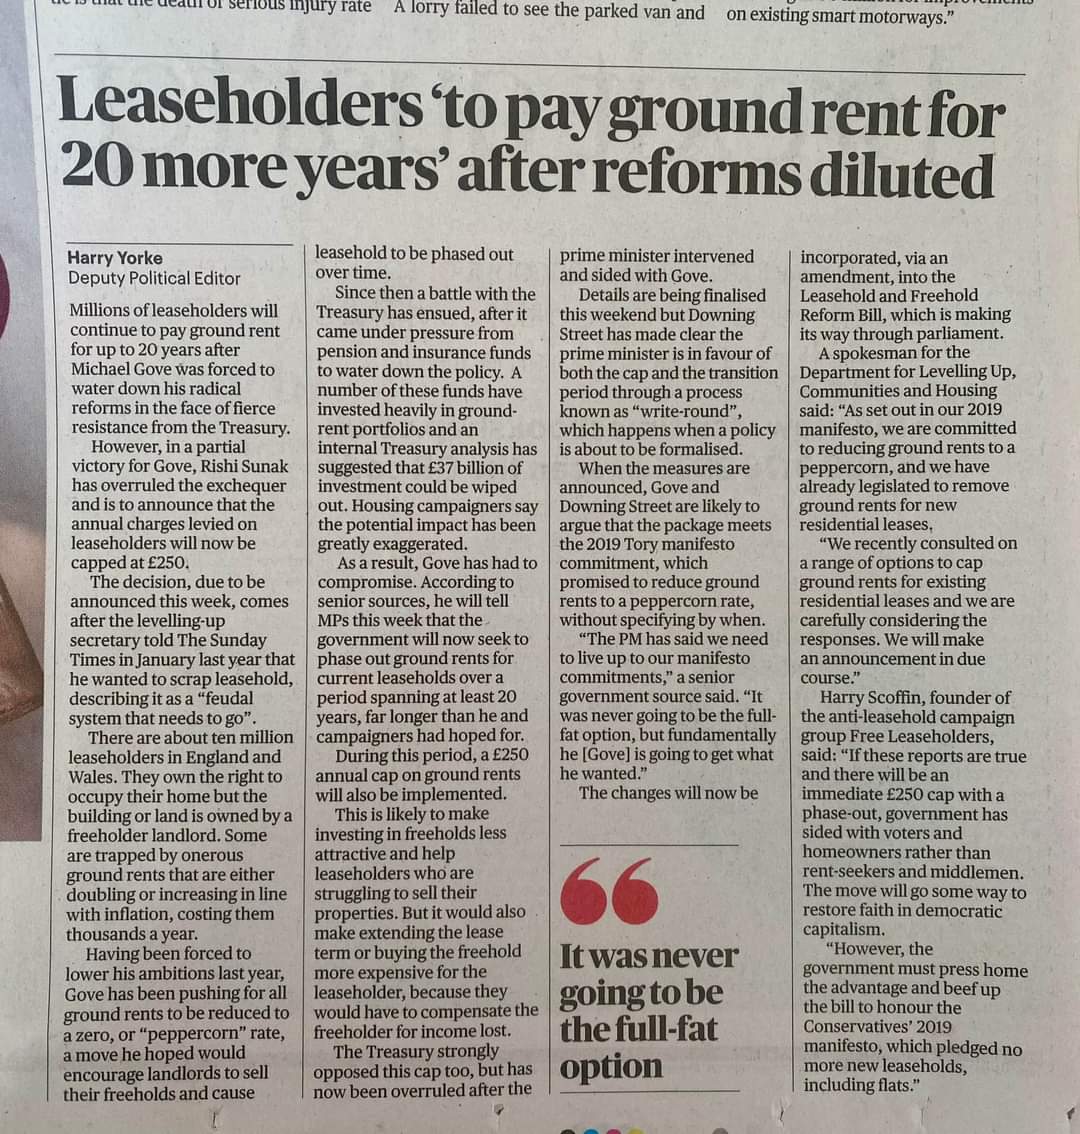 Michael Gove looks set to abolish ground rents to #peppercorn in 20 years time with a cap at £250. This is good news for those plagued with doubling ground rents. 

But the most urgent issue is #BuildingSafety, with 1.7 million excluded from protection against ruinous building